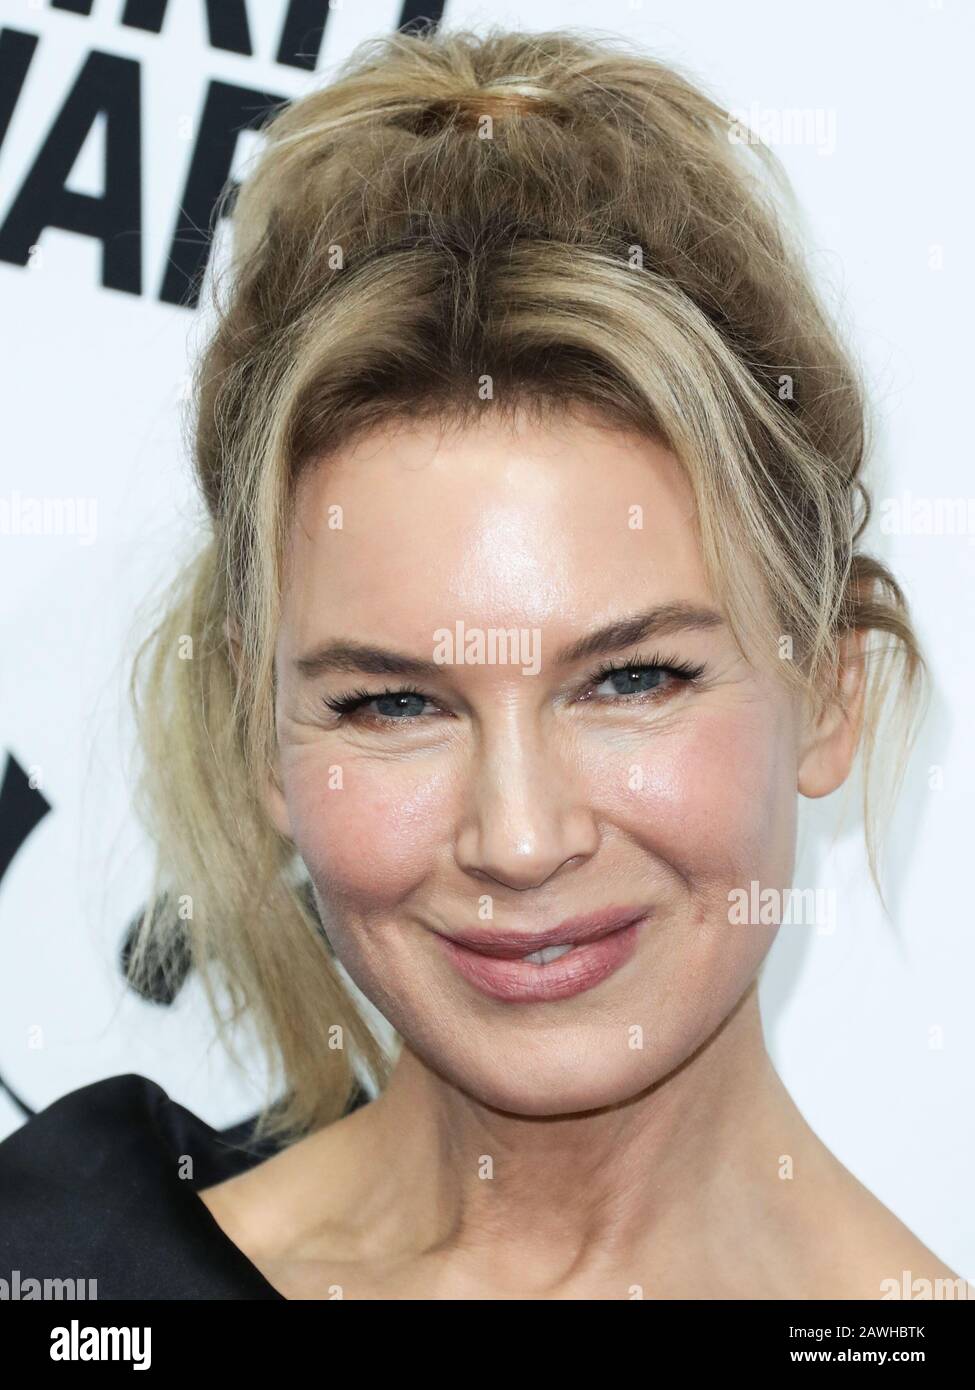 Santa Monica, United States. 08th Feb, 2020. SANTA MONICA, LOS ANGELES, CALIFORNIA, USA - FEBRUARY 08: Actress Renee Zellweger poses in the press room with the Best Female Lead award for 'Judy' at the 2020 Film Independent Spirit Awards held at the Santa Monica Beach on February 8, 2020 in Santa Monica, Los Angeles, California, United States. (Photo by Xavier Collin/Image Press Agency) Credit: Image Press Agency/Alamy Live News Stock Photo